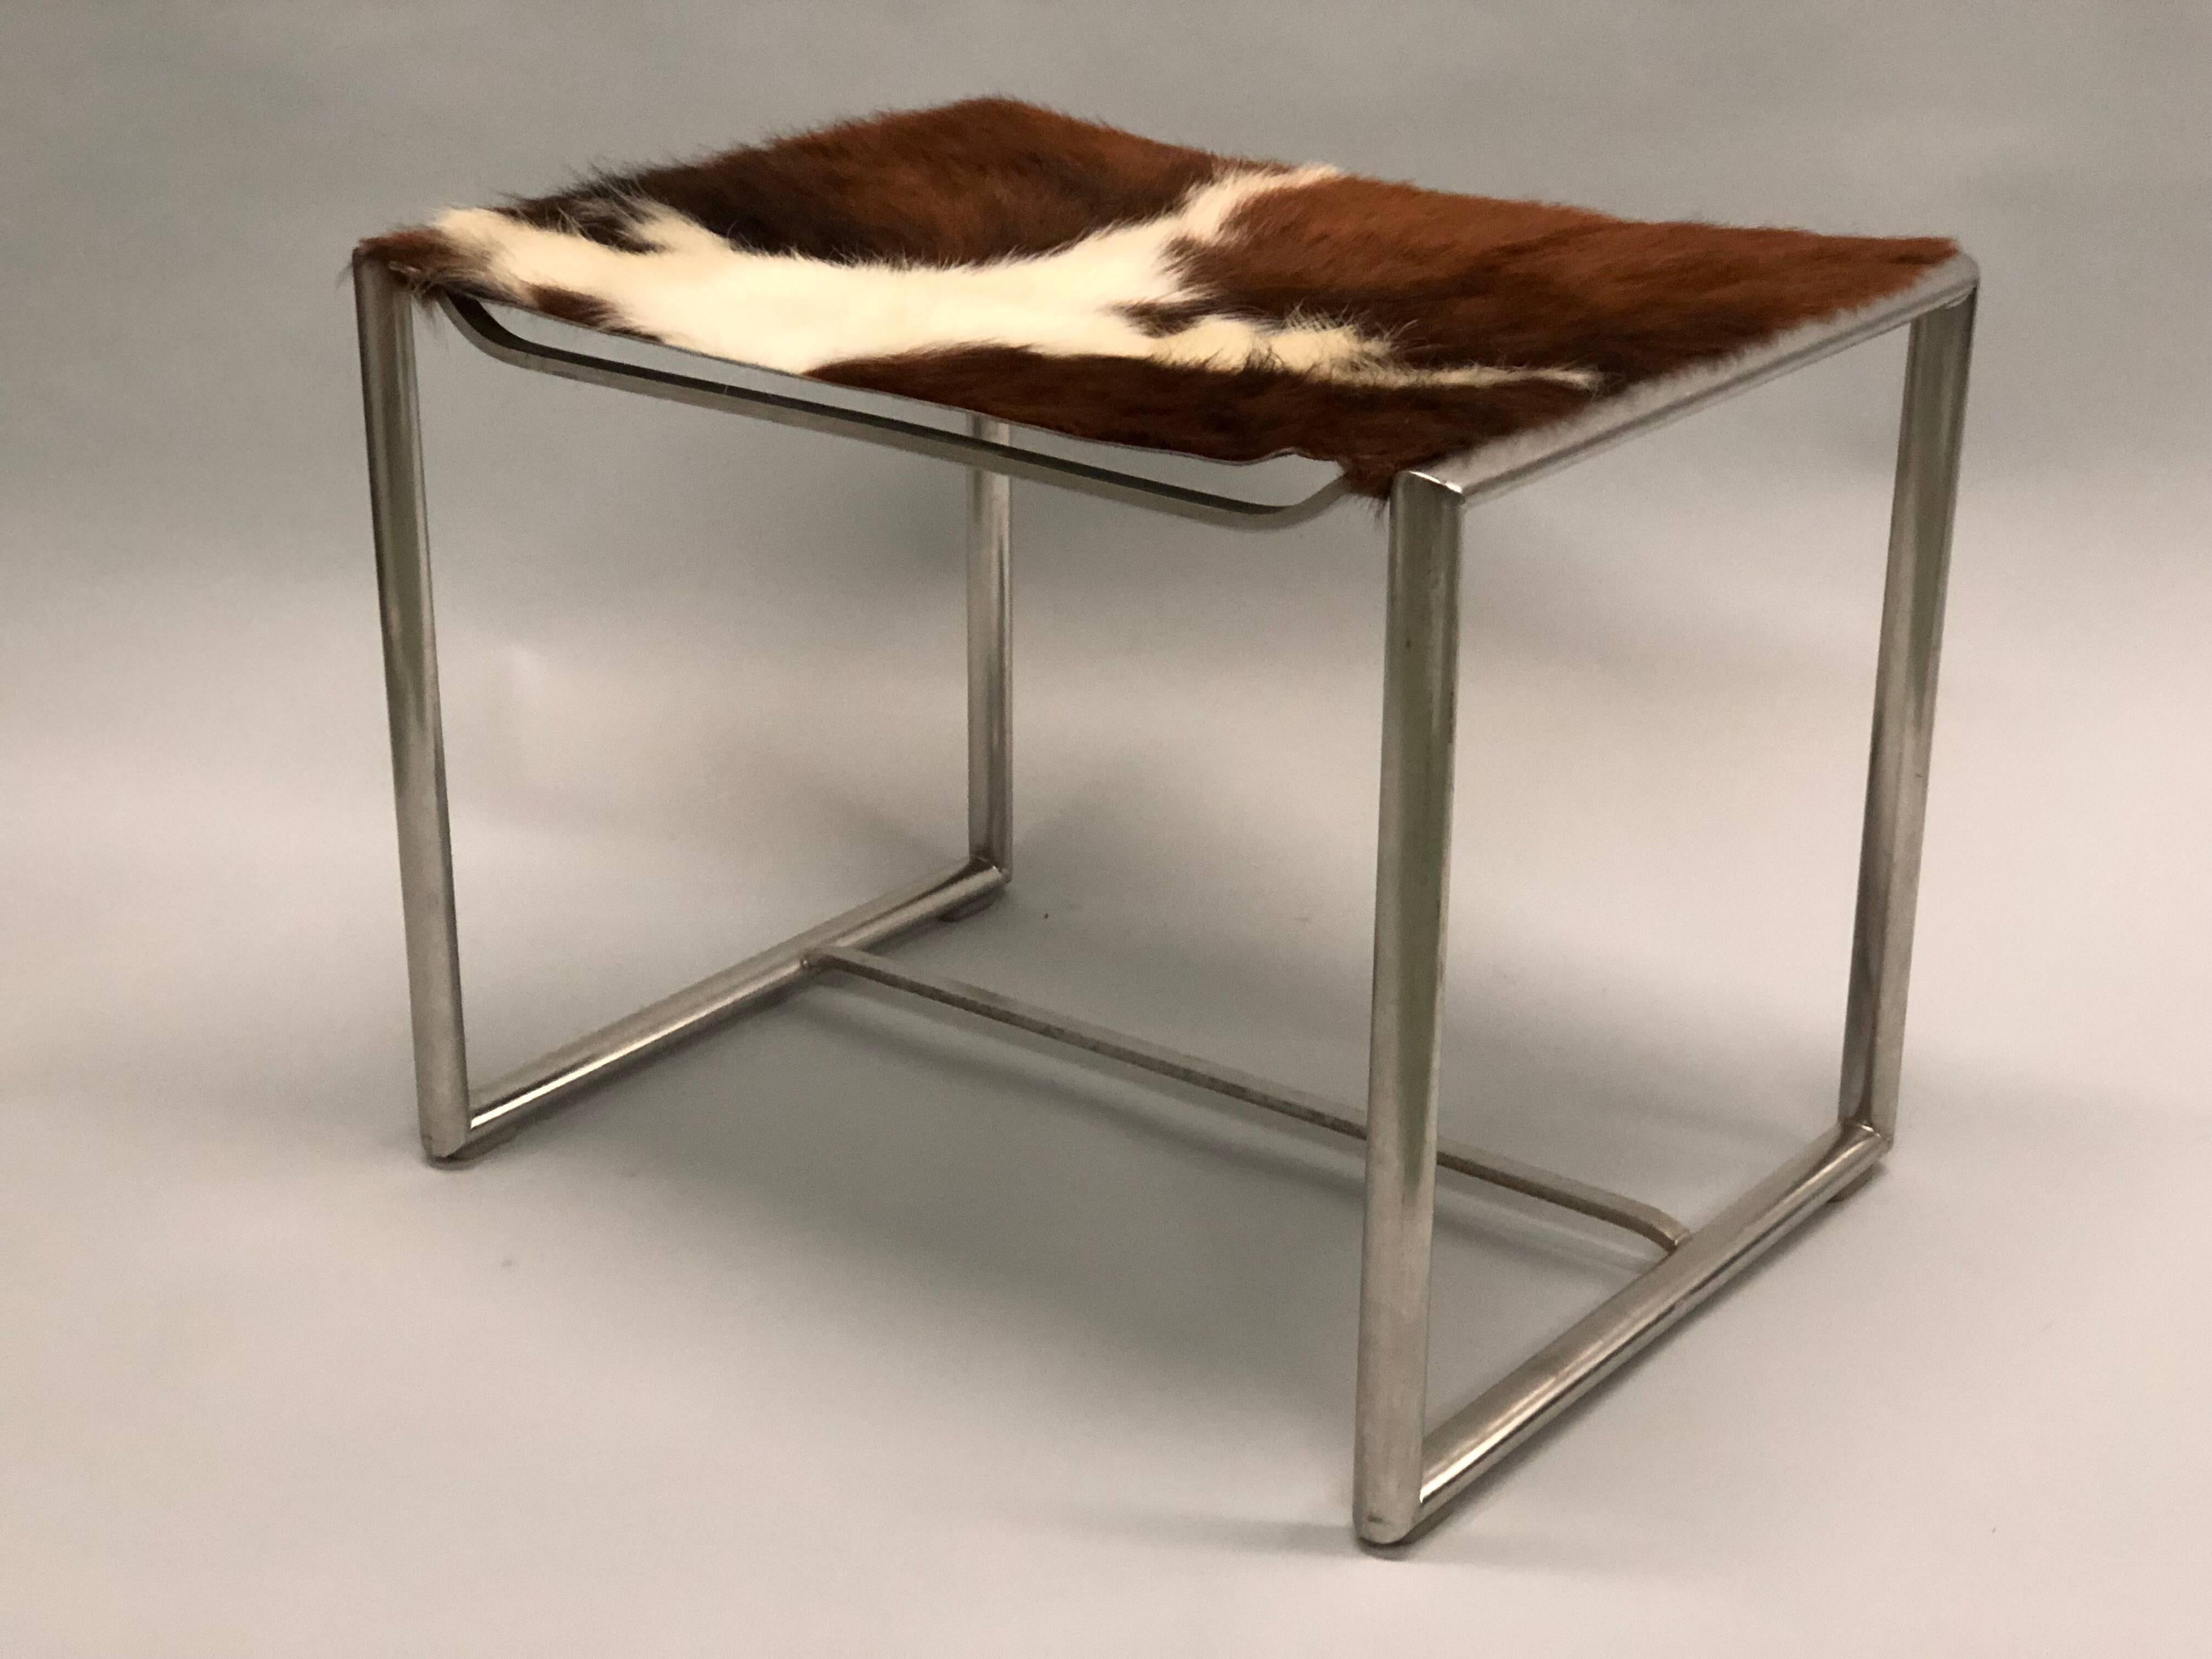 20th Century Pair of French Mid-Century Modern 'Bauhaus' Nickel Steel Benches or Stools